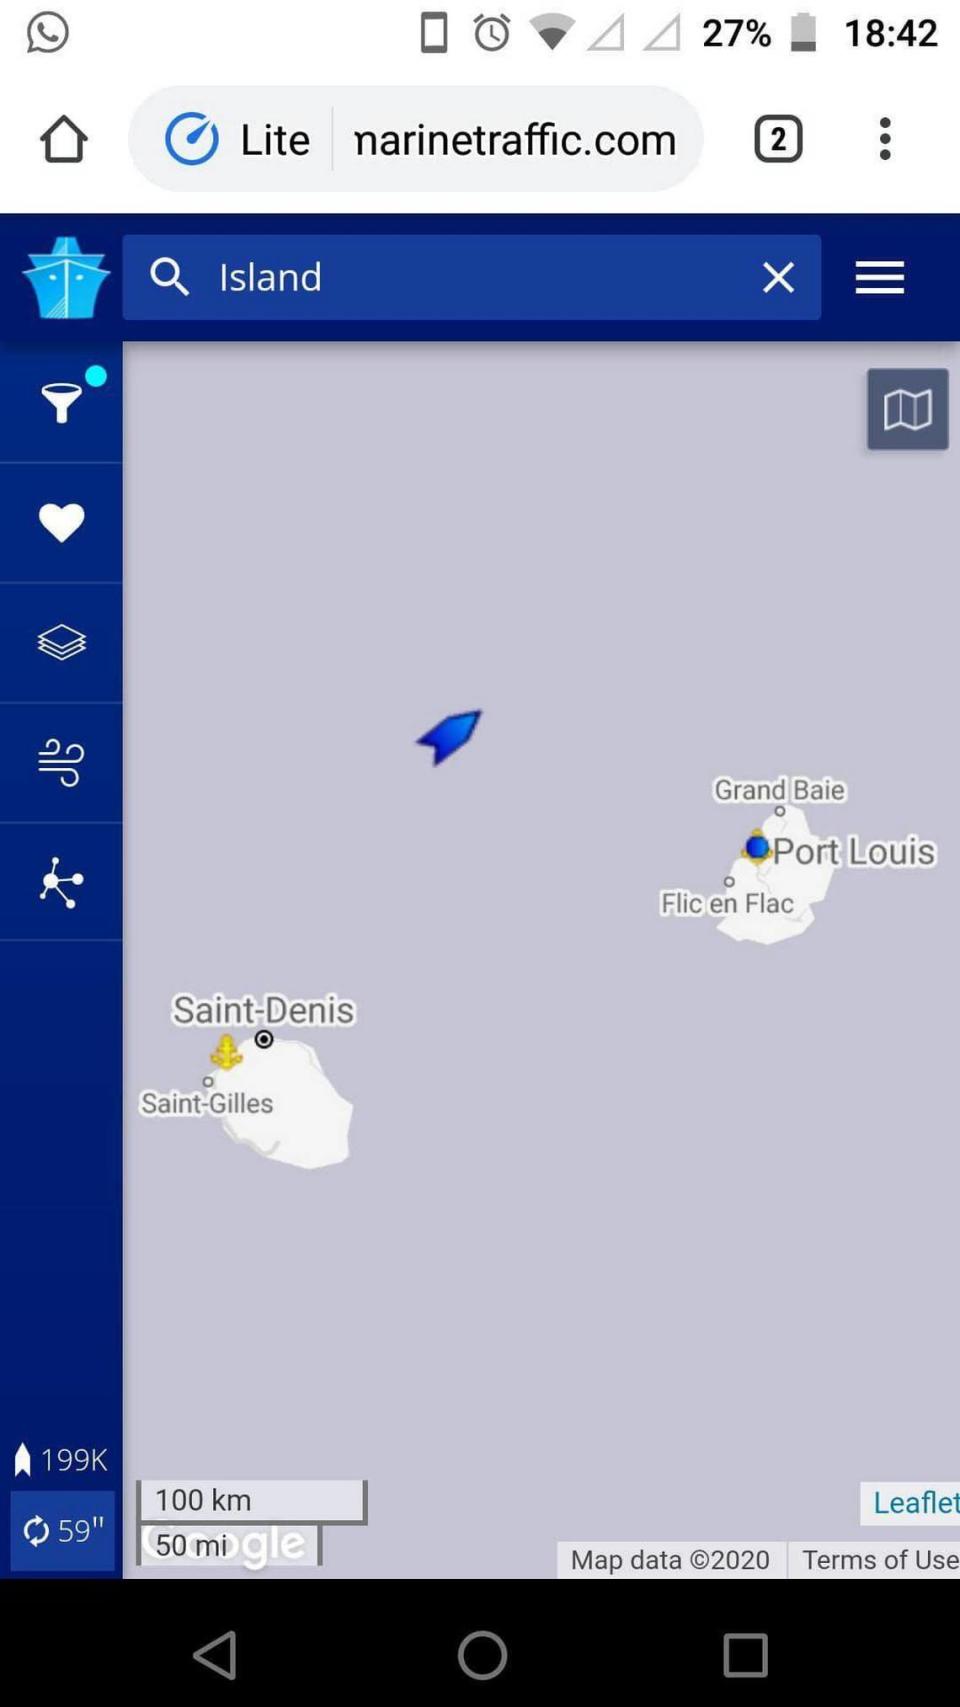 Gan Sungaralingum’s phone screen shows the location of the Island Princess as it passes within 50 miles of his homeland of Mauritius and the capitol Port Louis May 25, 2020. Mauritius was locked down due to the pandemic and would not let any ships into port to let the crew members come home. Gan was stuck at sea for three more months after passing his homeland.